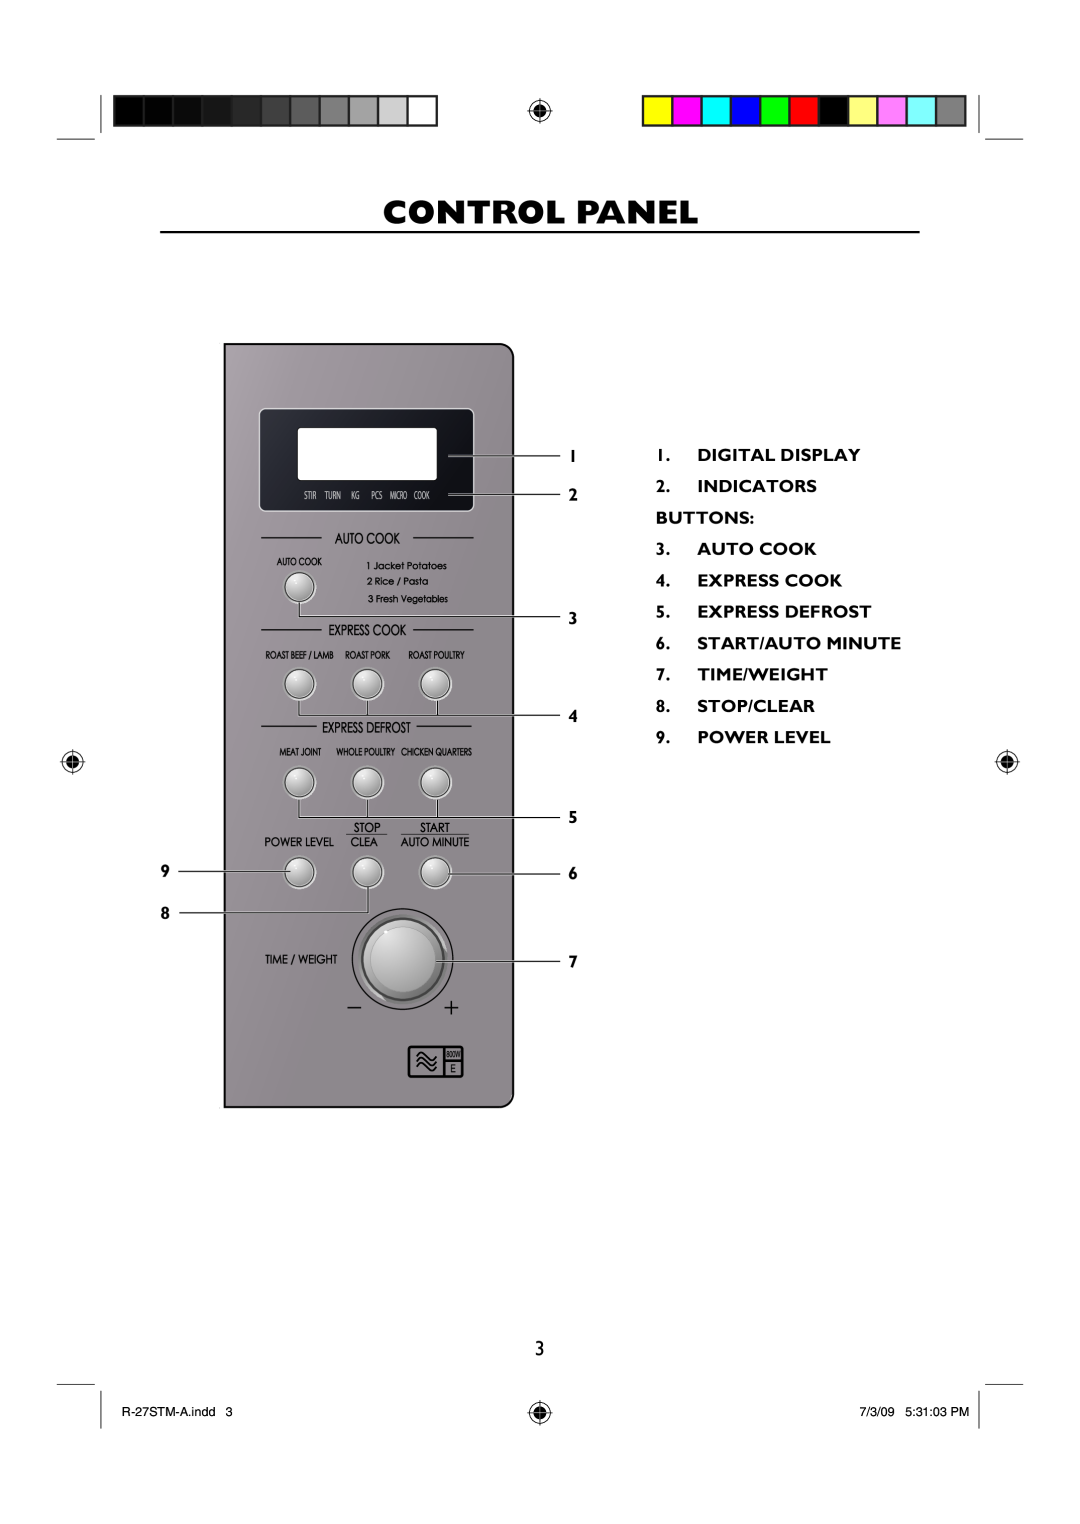 Sharp R-27STM-A Control Panel, Digital Display, Indicators, Buttons, Auto Cook, Express Cook, Express Defrost, Time/Weight 